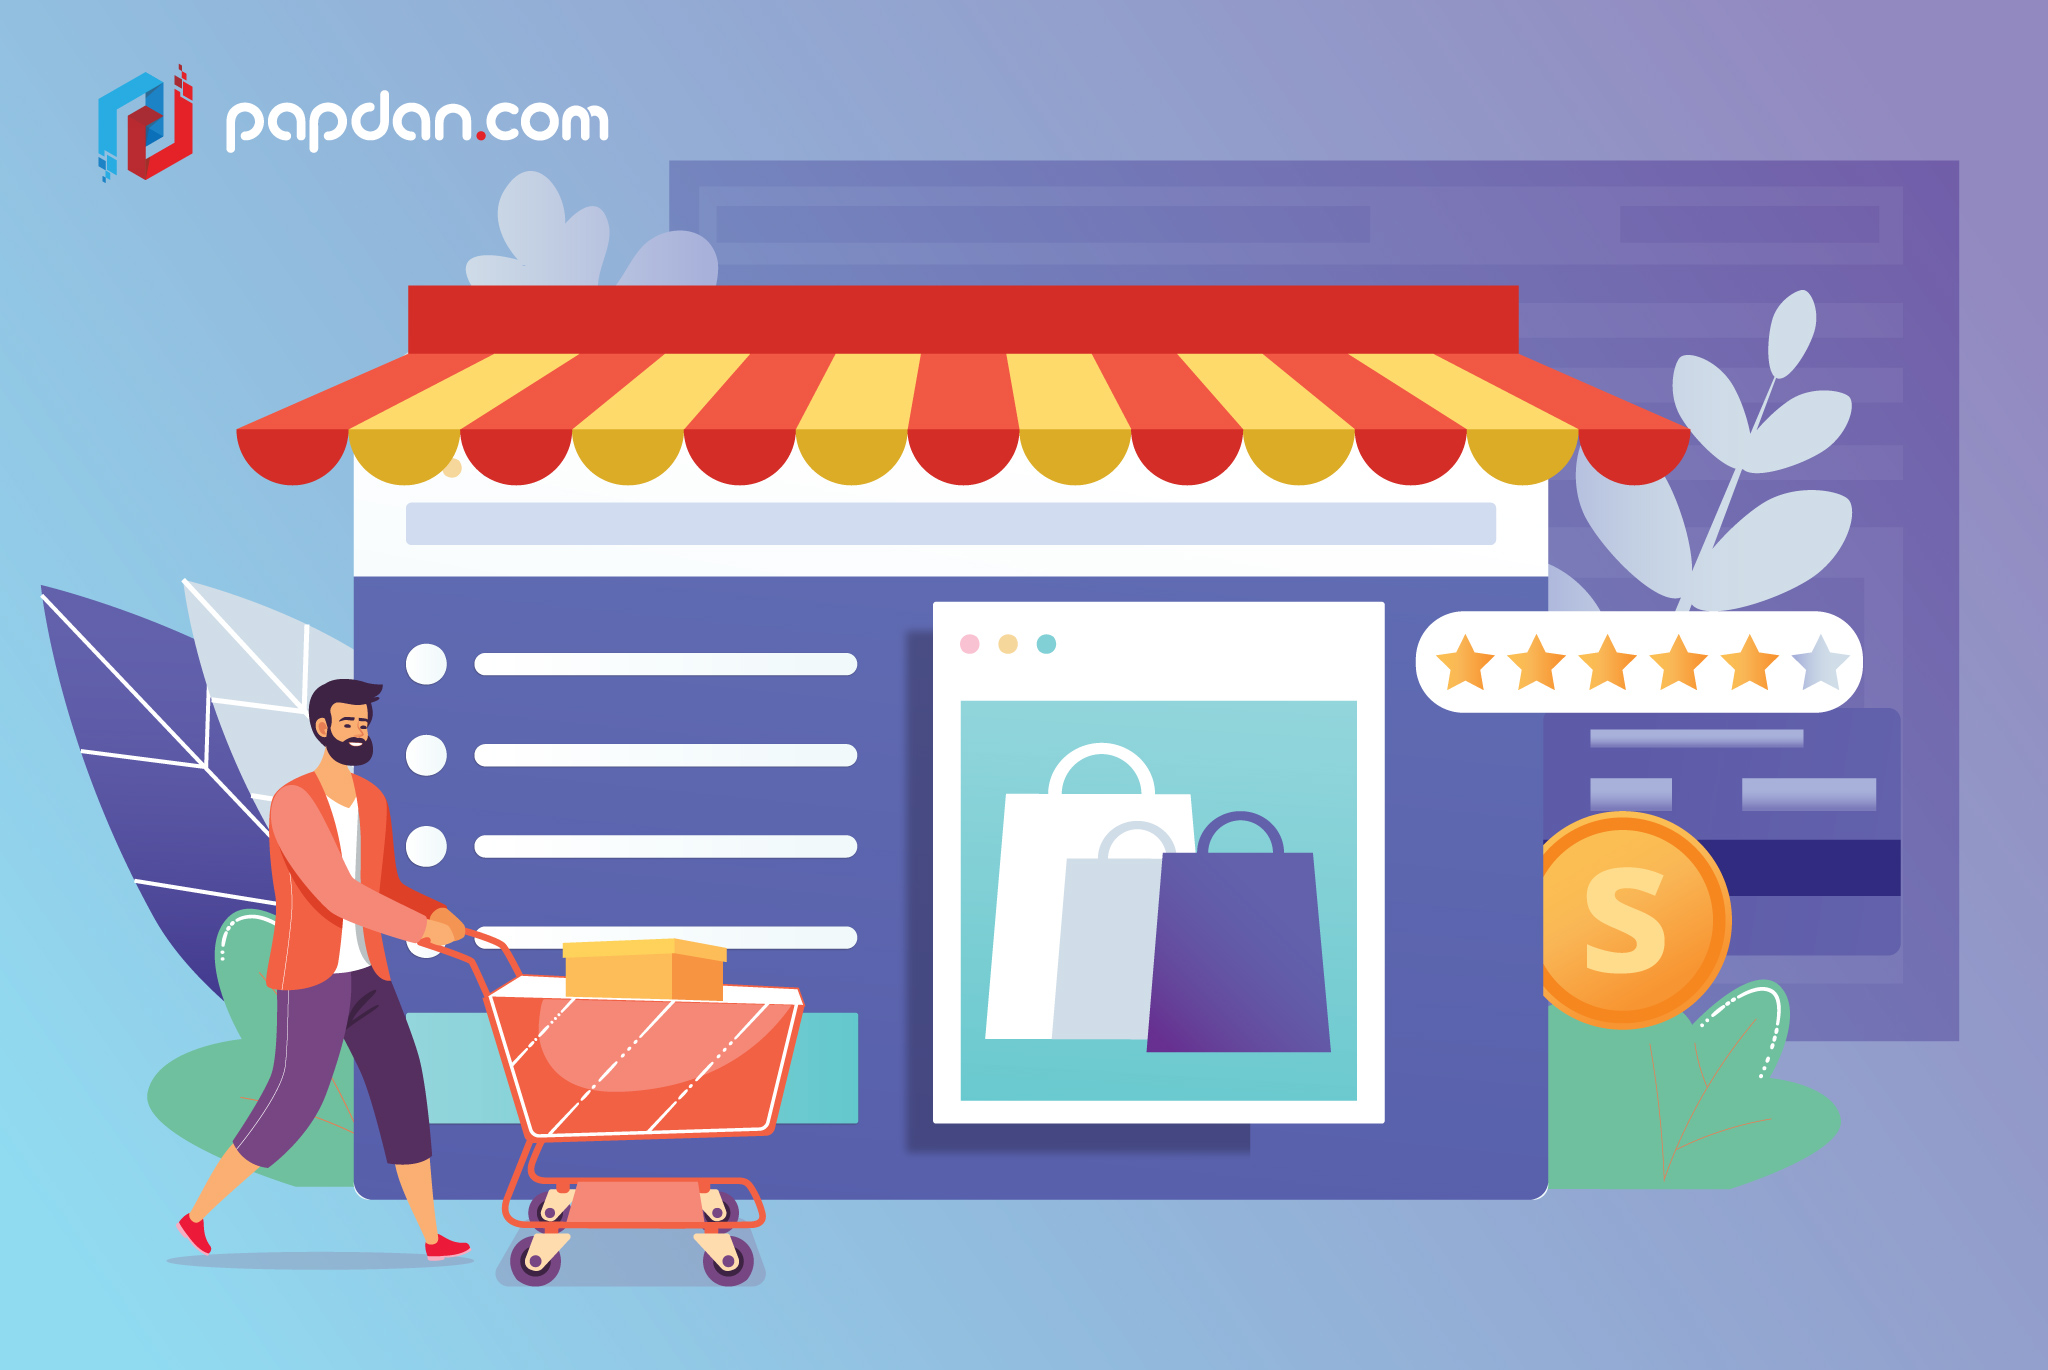 The Must-Haves: What Should Be Included in Your eCommerce Website?